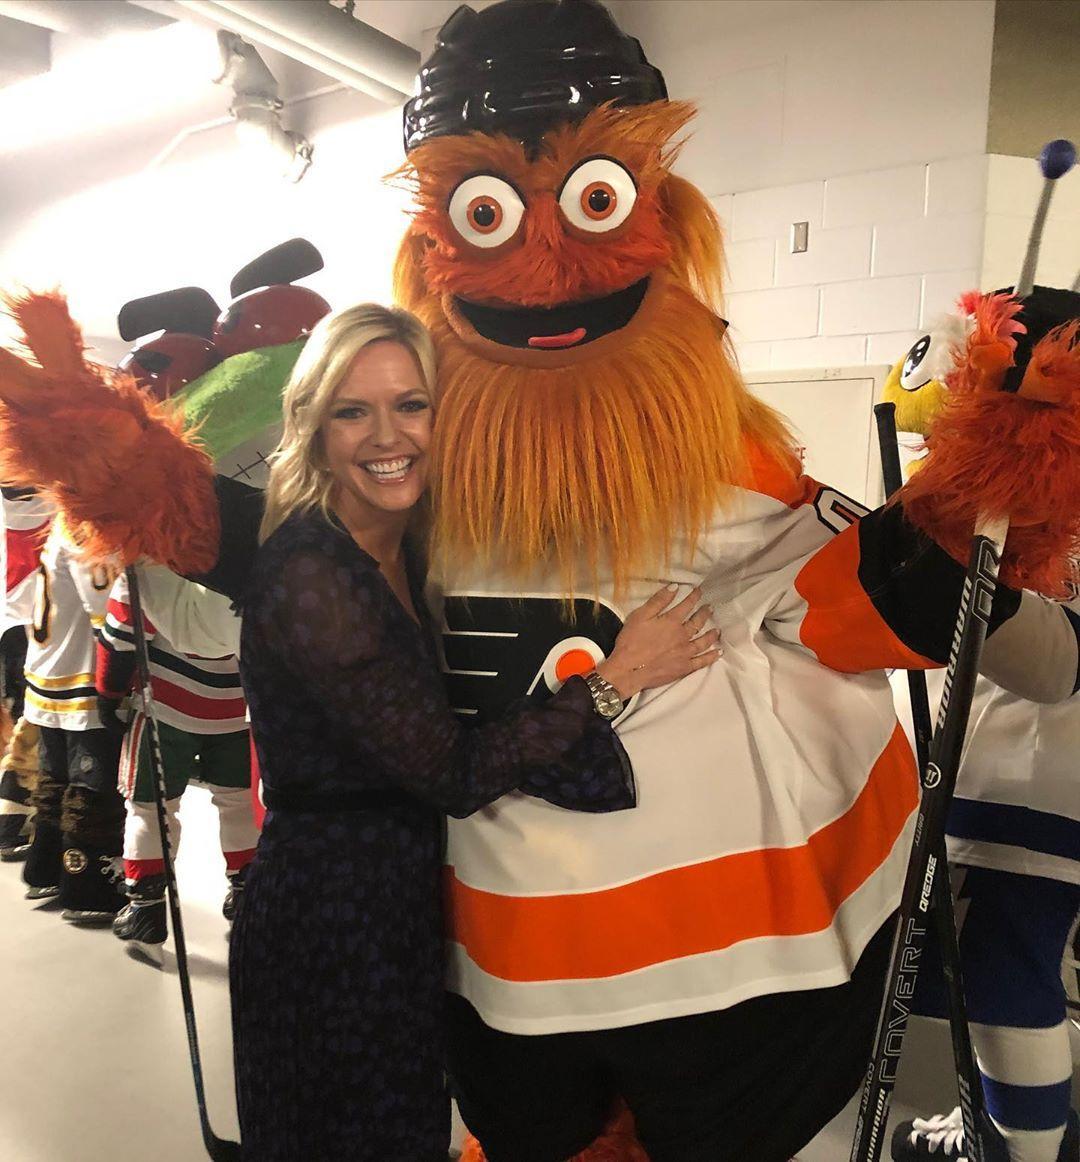 60+ Kathryn Tappen Hot Pictures Will Blow Your Minds | Best Of Comic Books